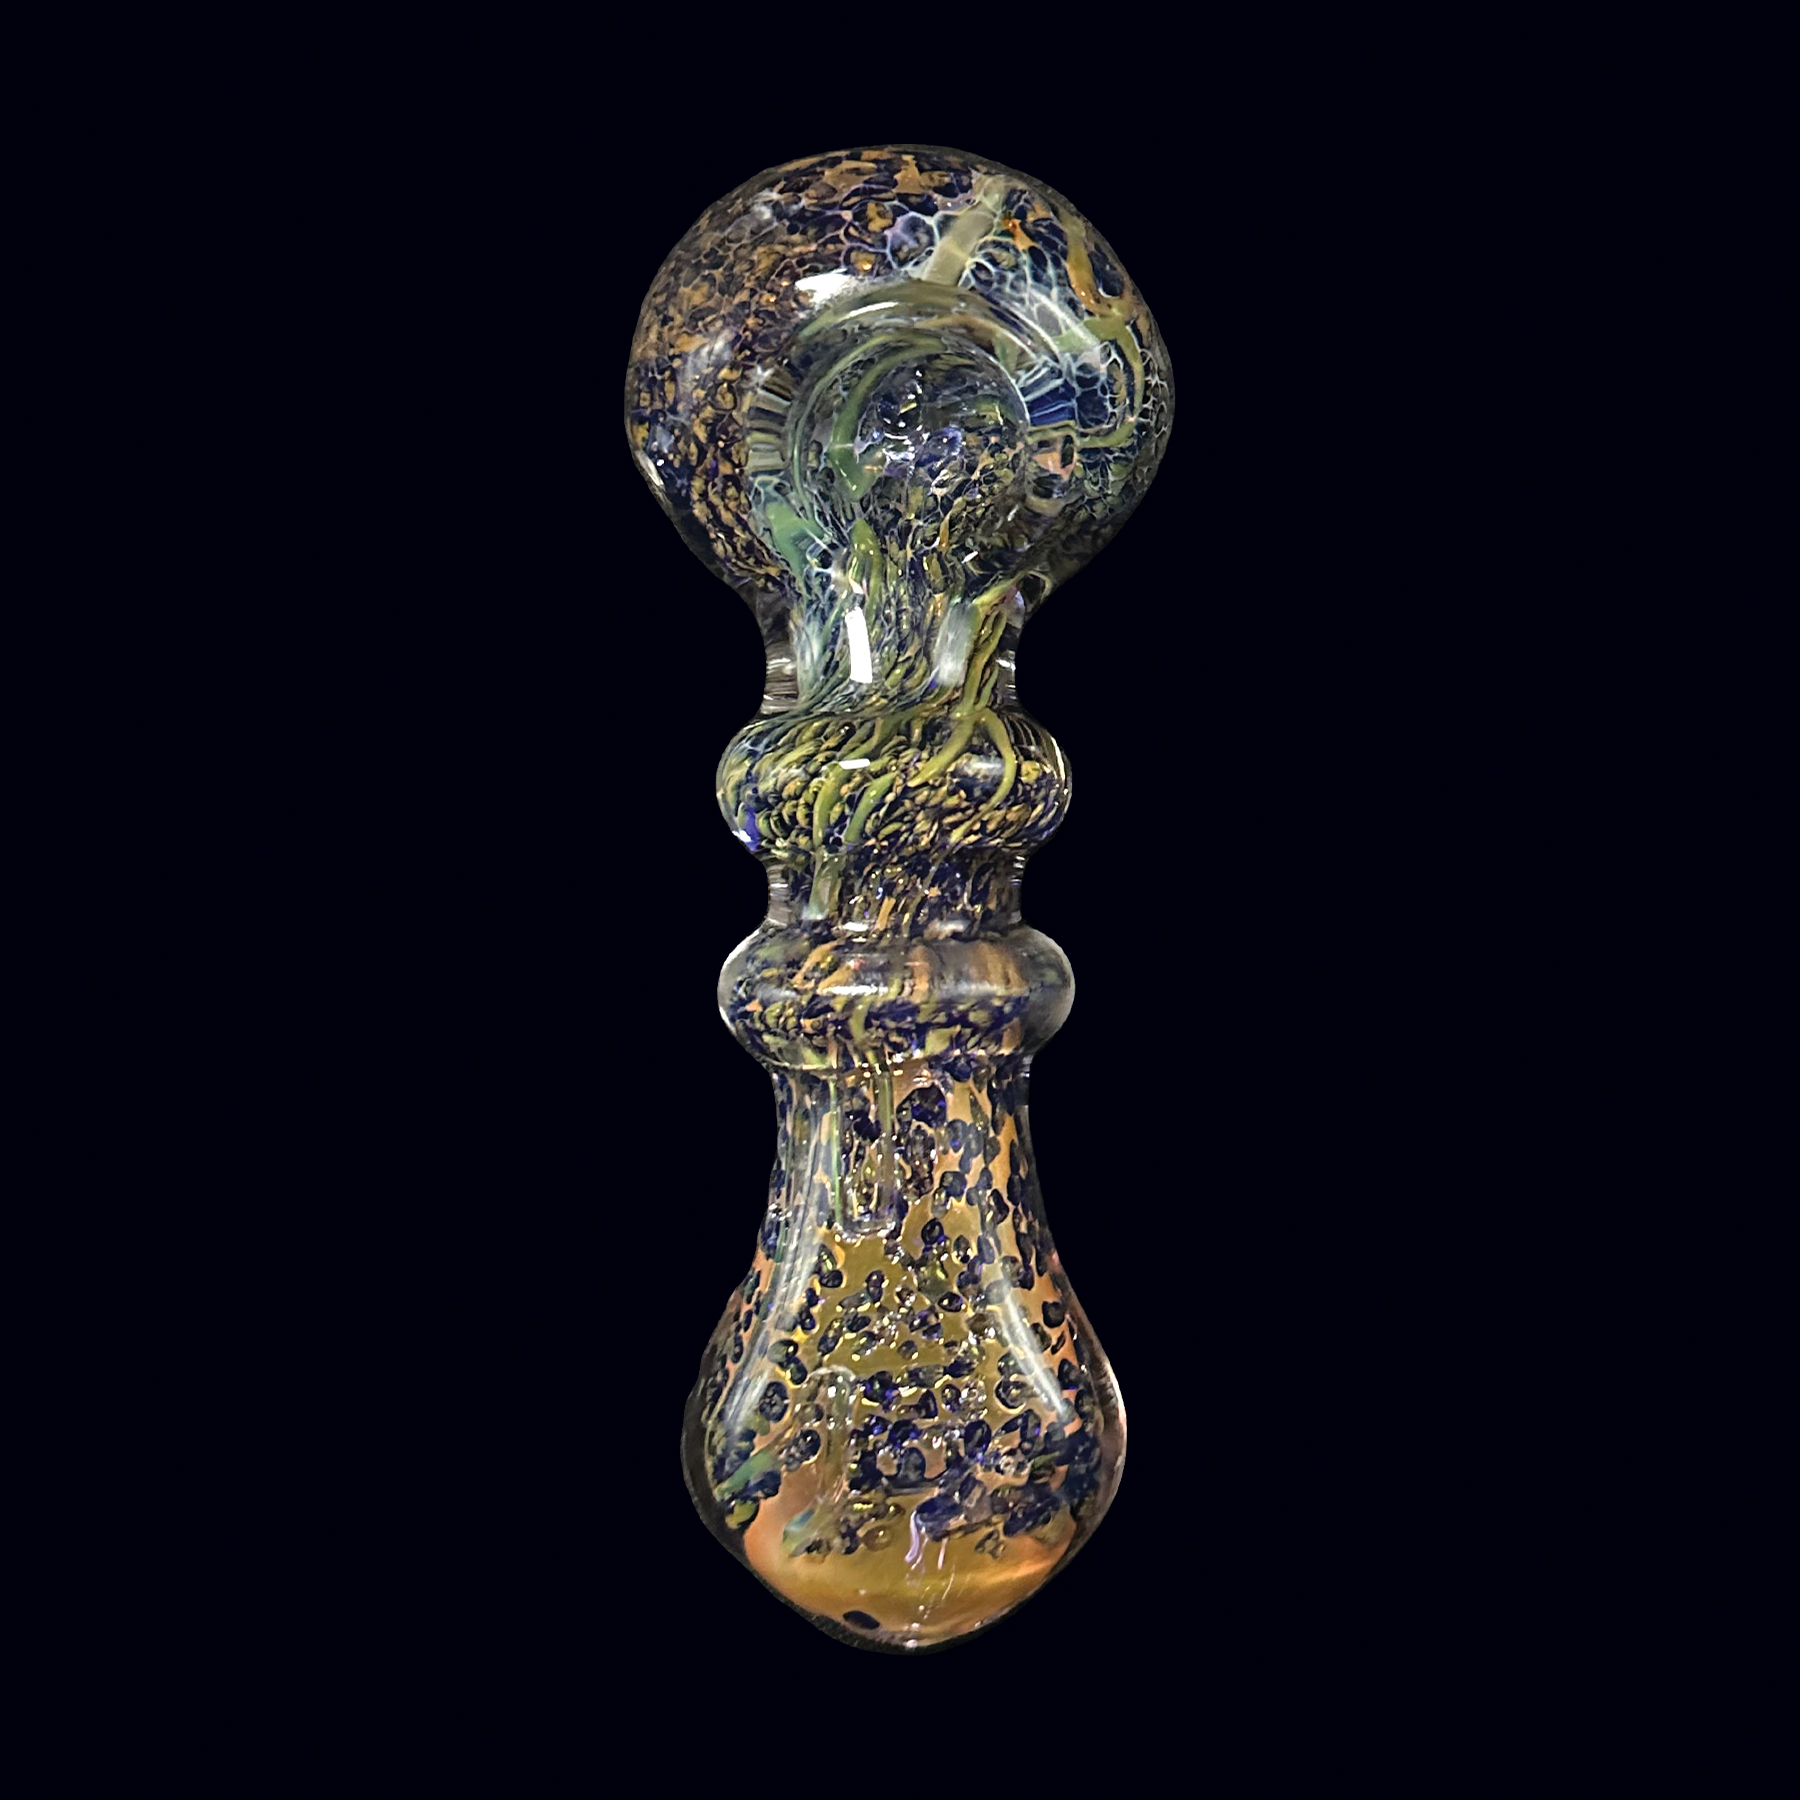 A glass pipe with blue and yellow speckles on it.